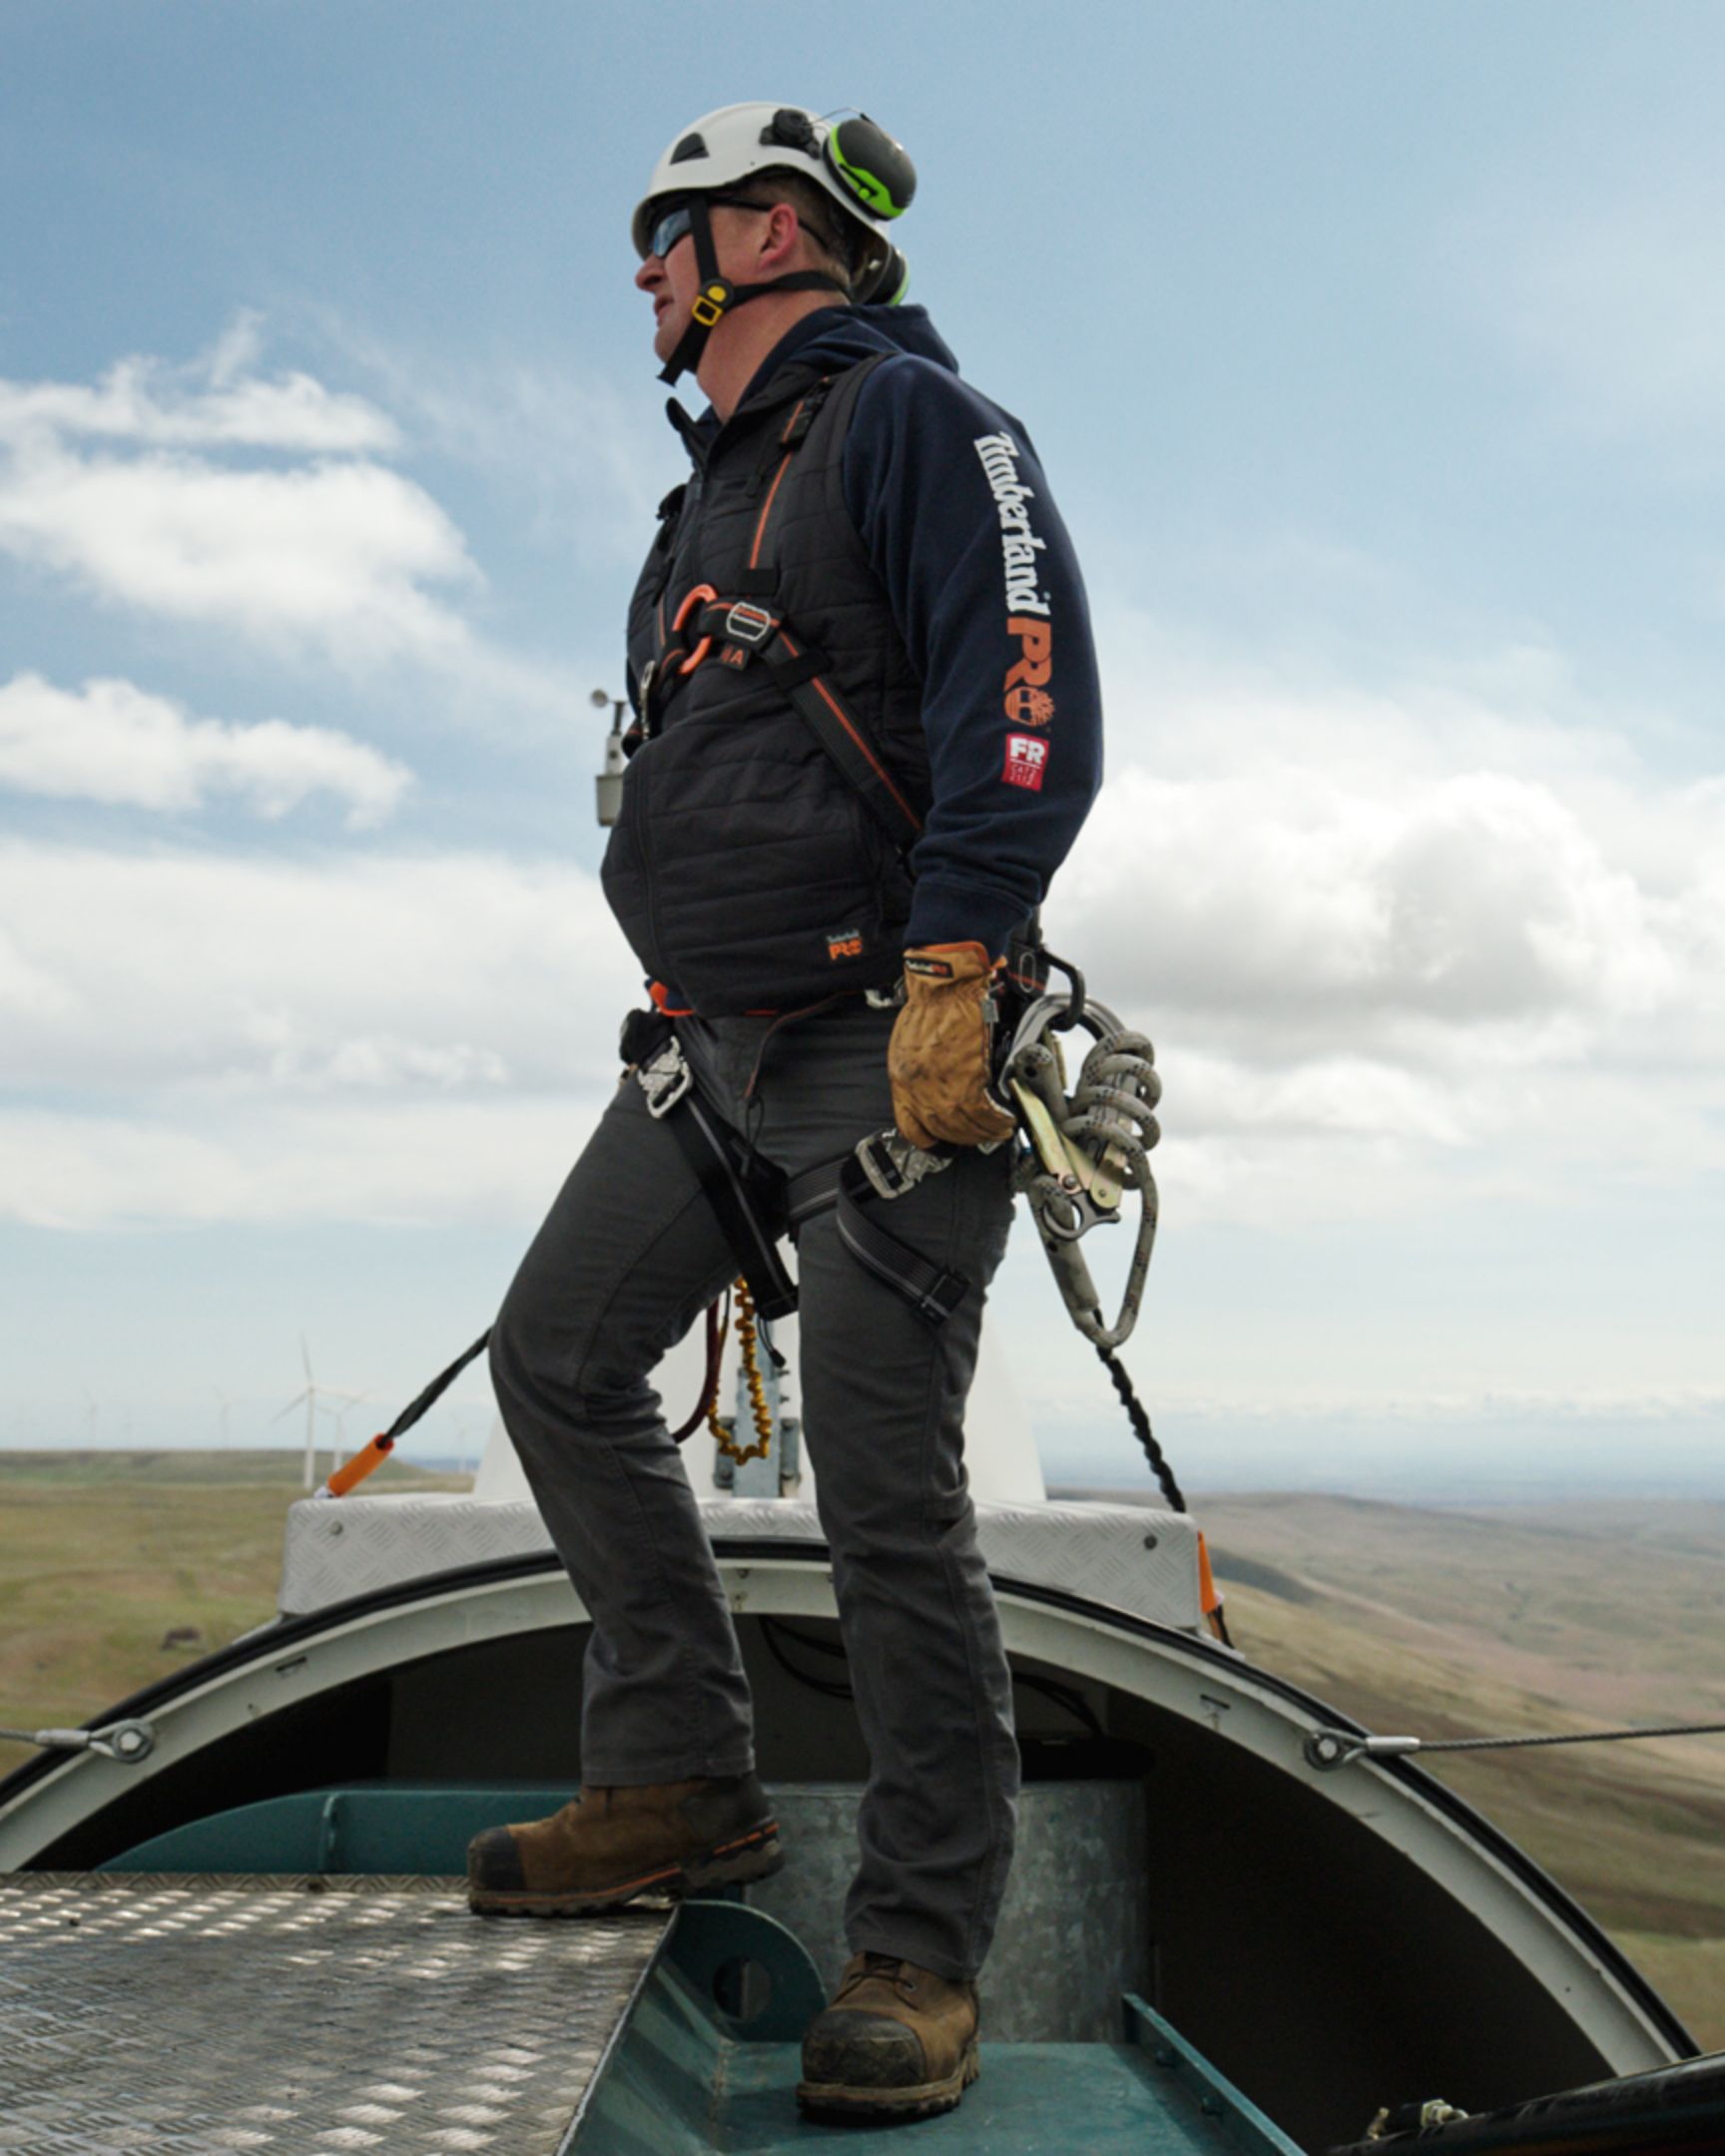 Man strapped into top of power-generating wind mill wearing a timberland pro sweatshirt and Timberland Boondock workboot